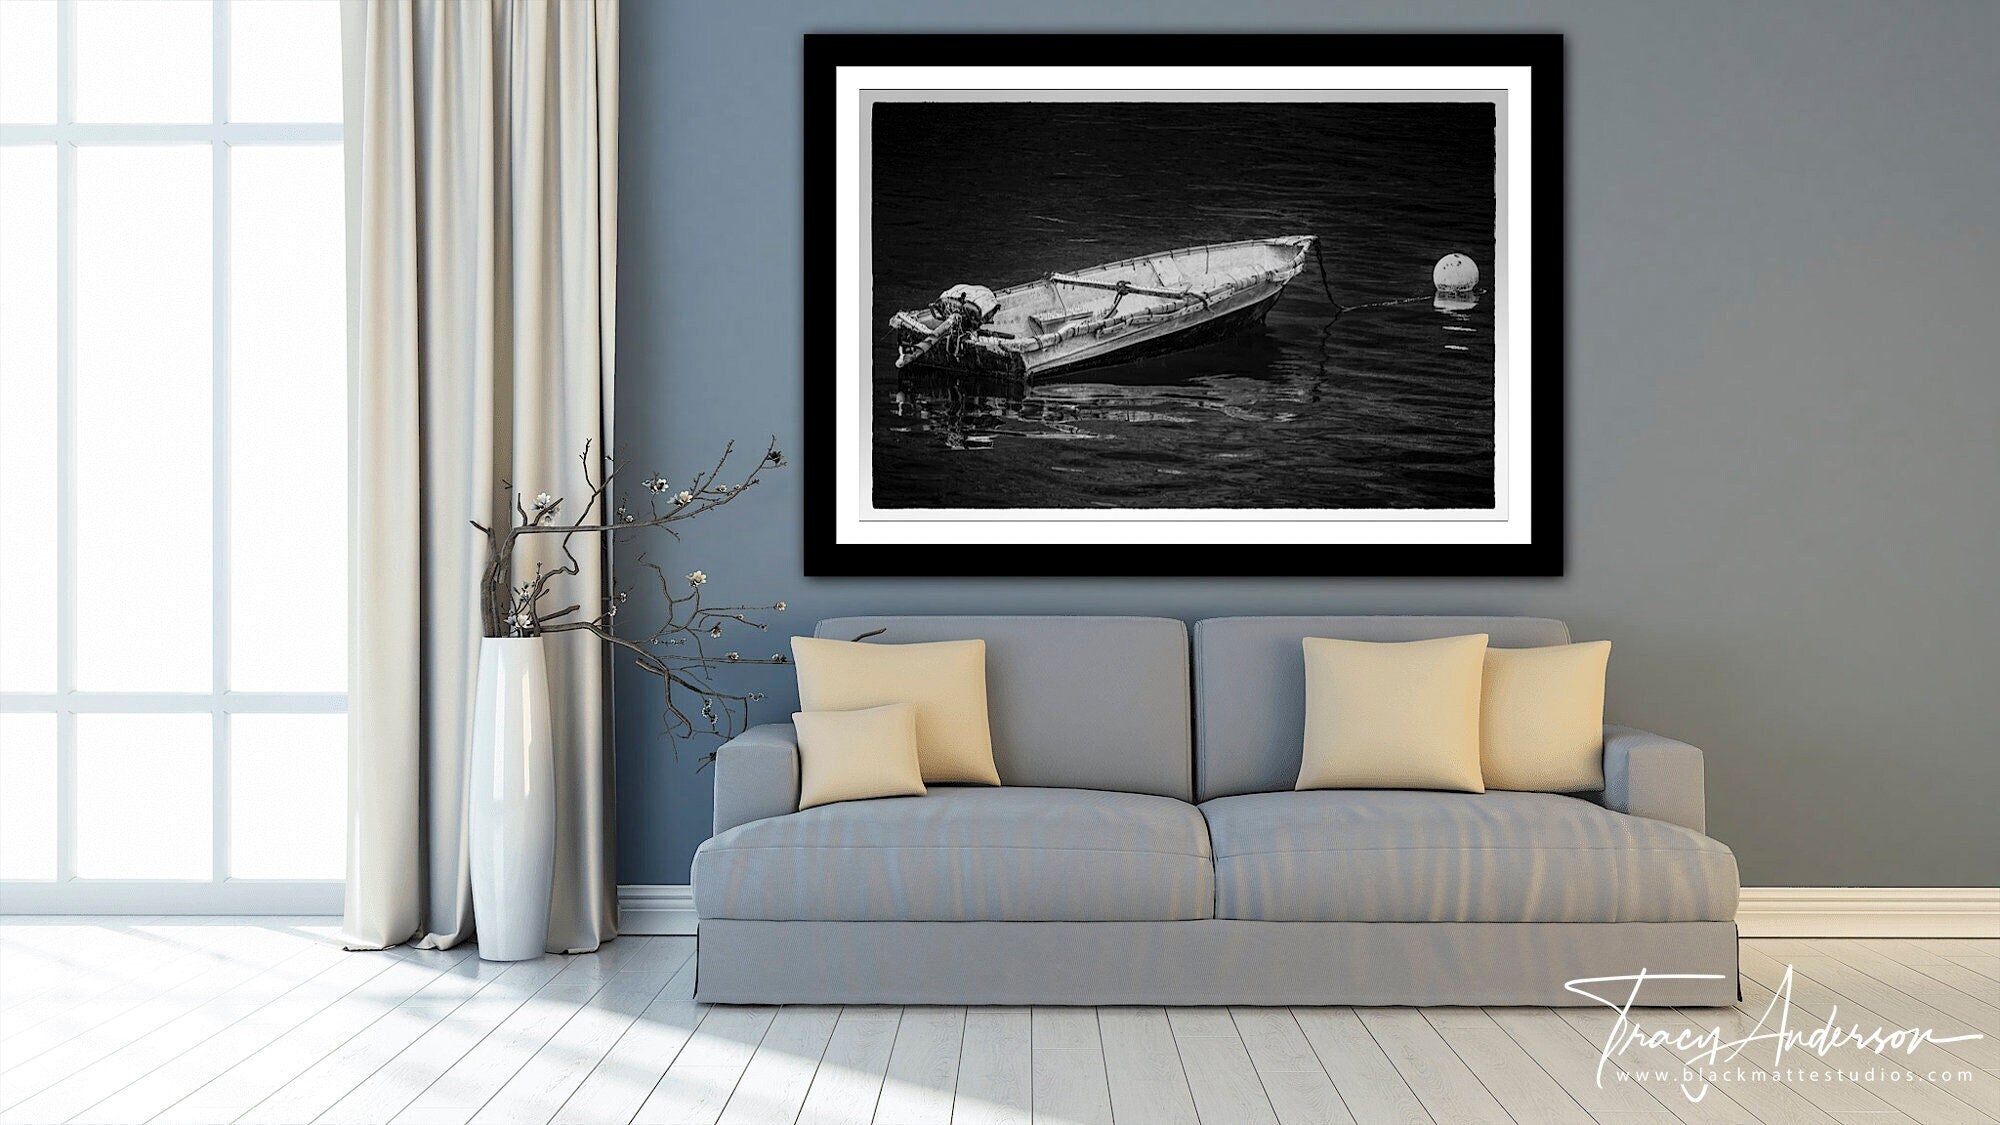 Old Fishing Boat Black and White Photo, Nautical Print, Weathered Boat Photo,  Vintage Boat Photo, Vintage Beach Décor, Beat up Boat Wall Art 